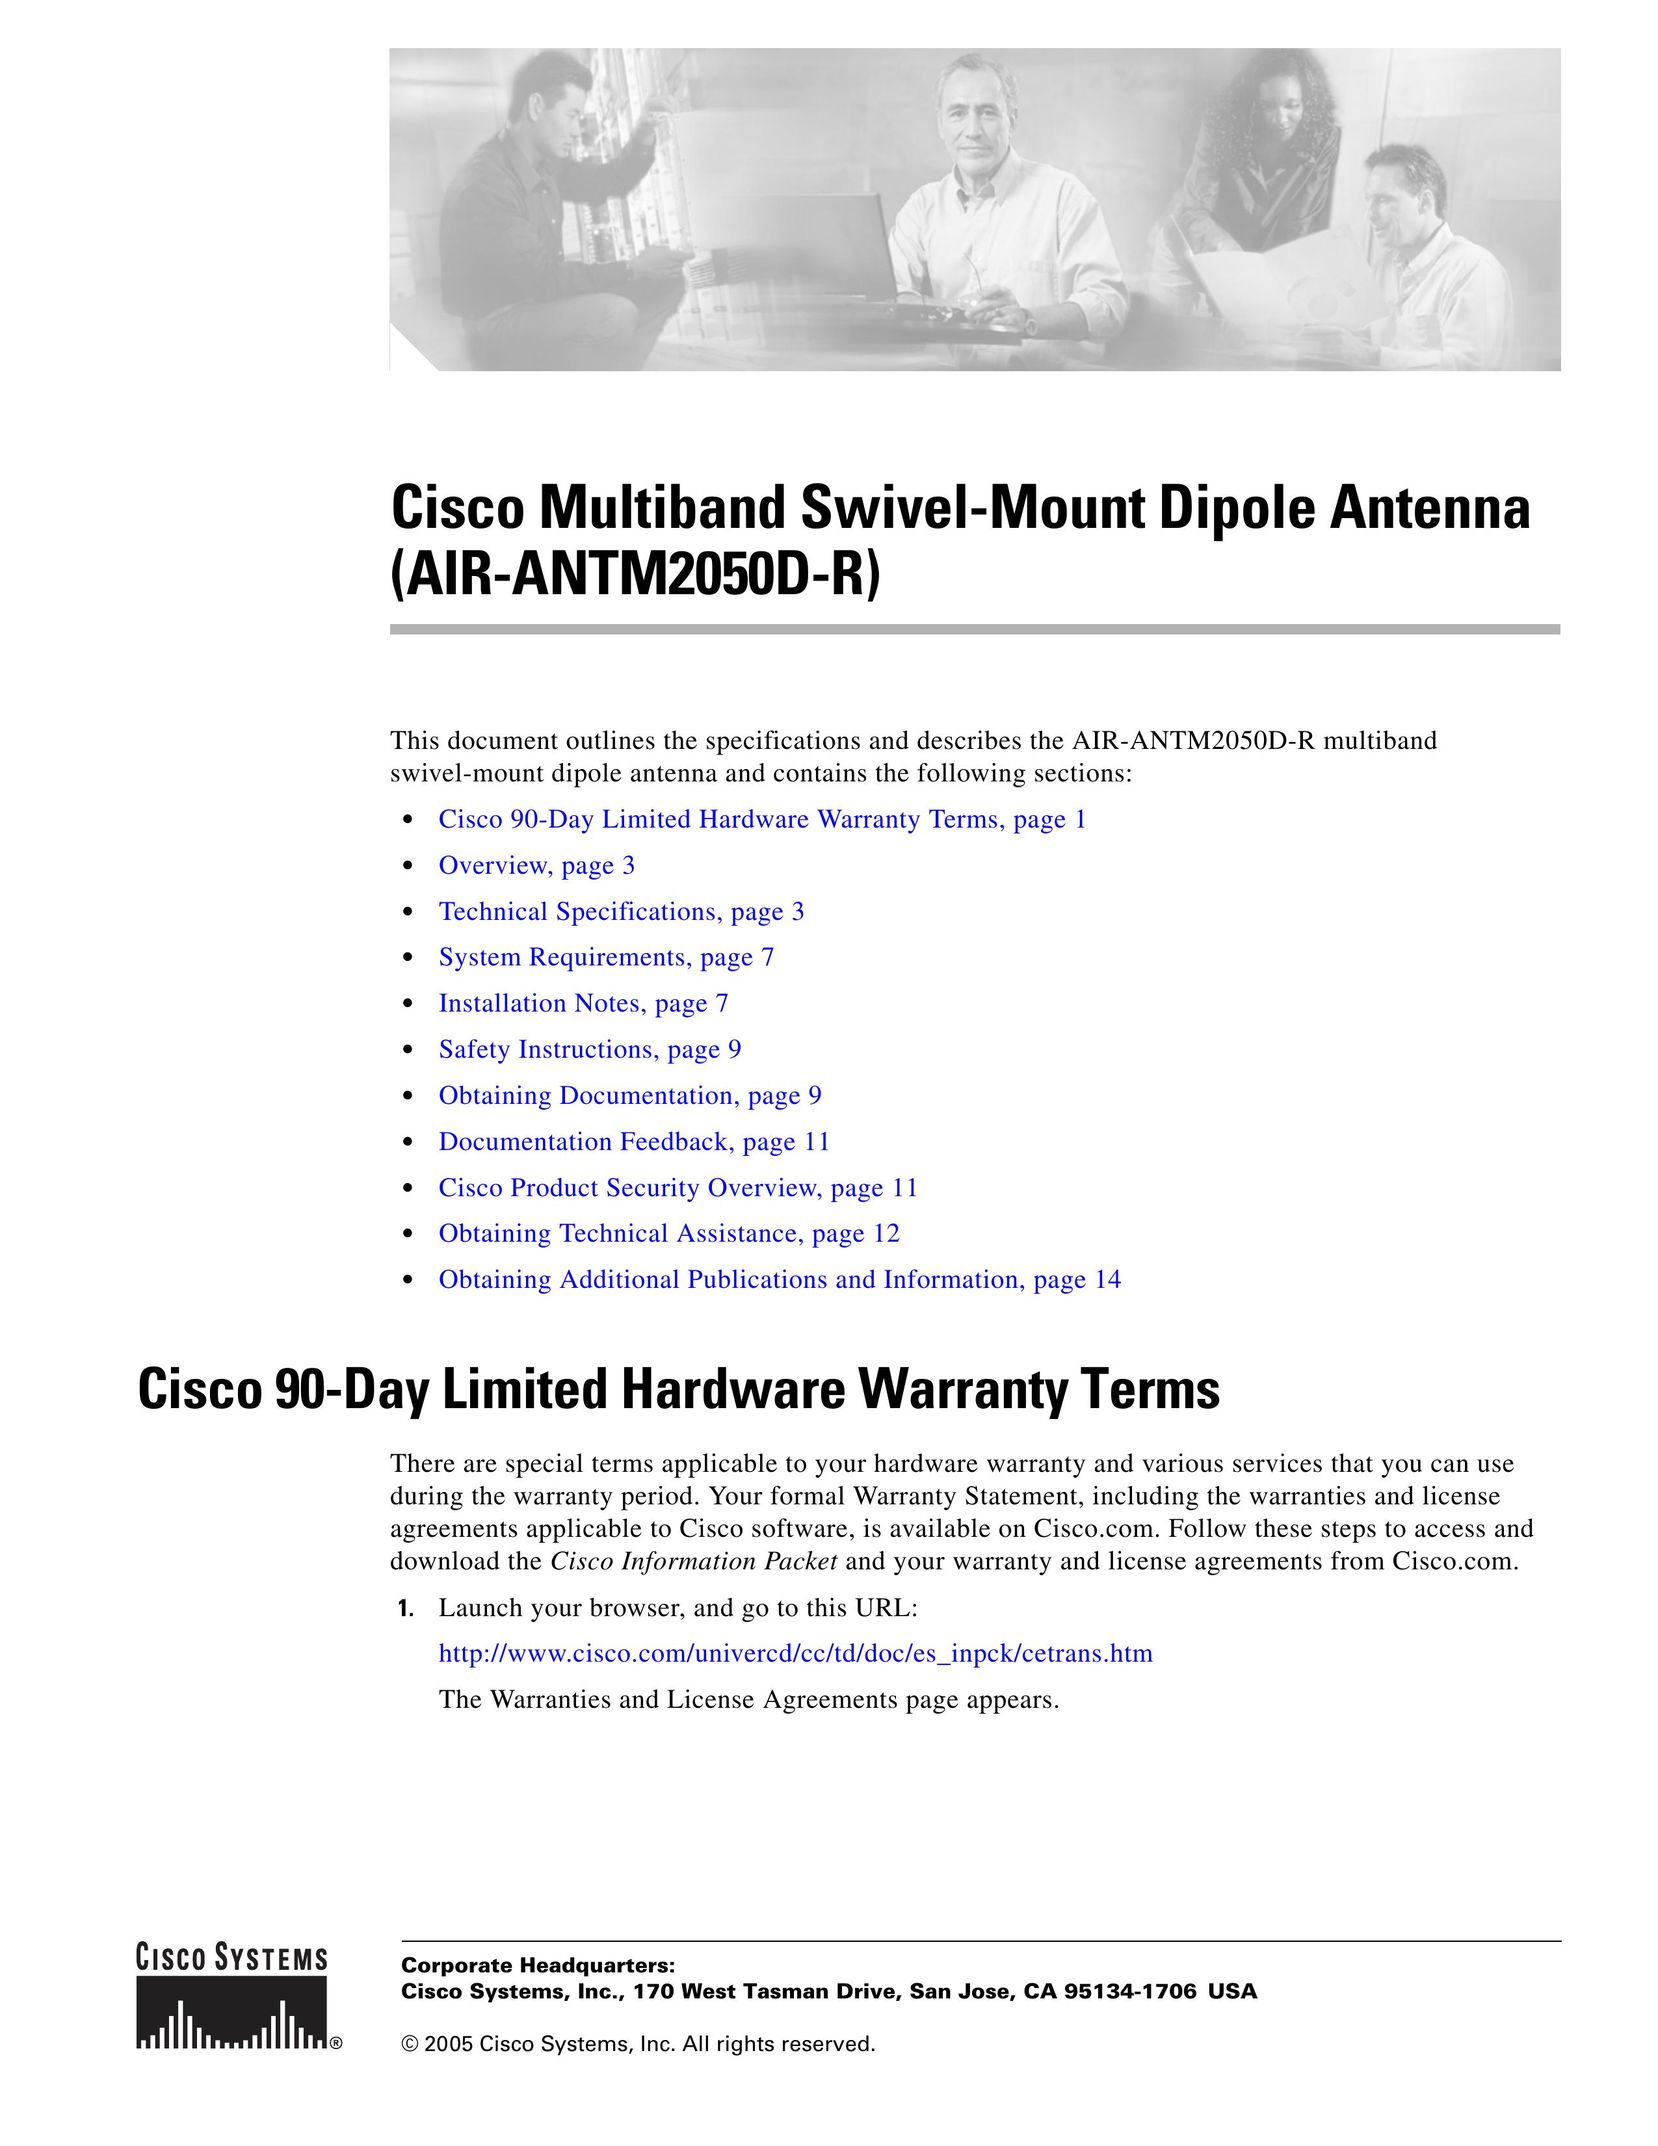 Cisco Systems AIR-ANTM2050D-R Stereo System User Manual